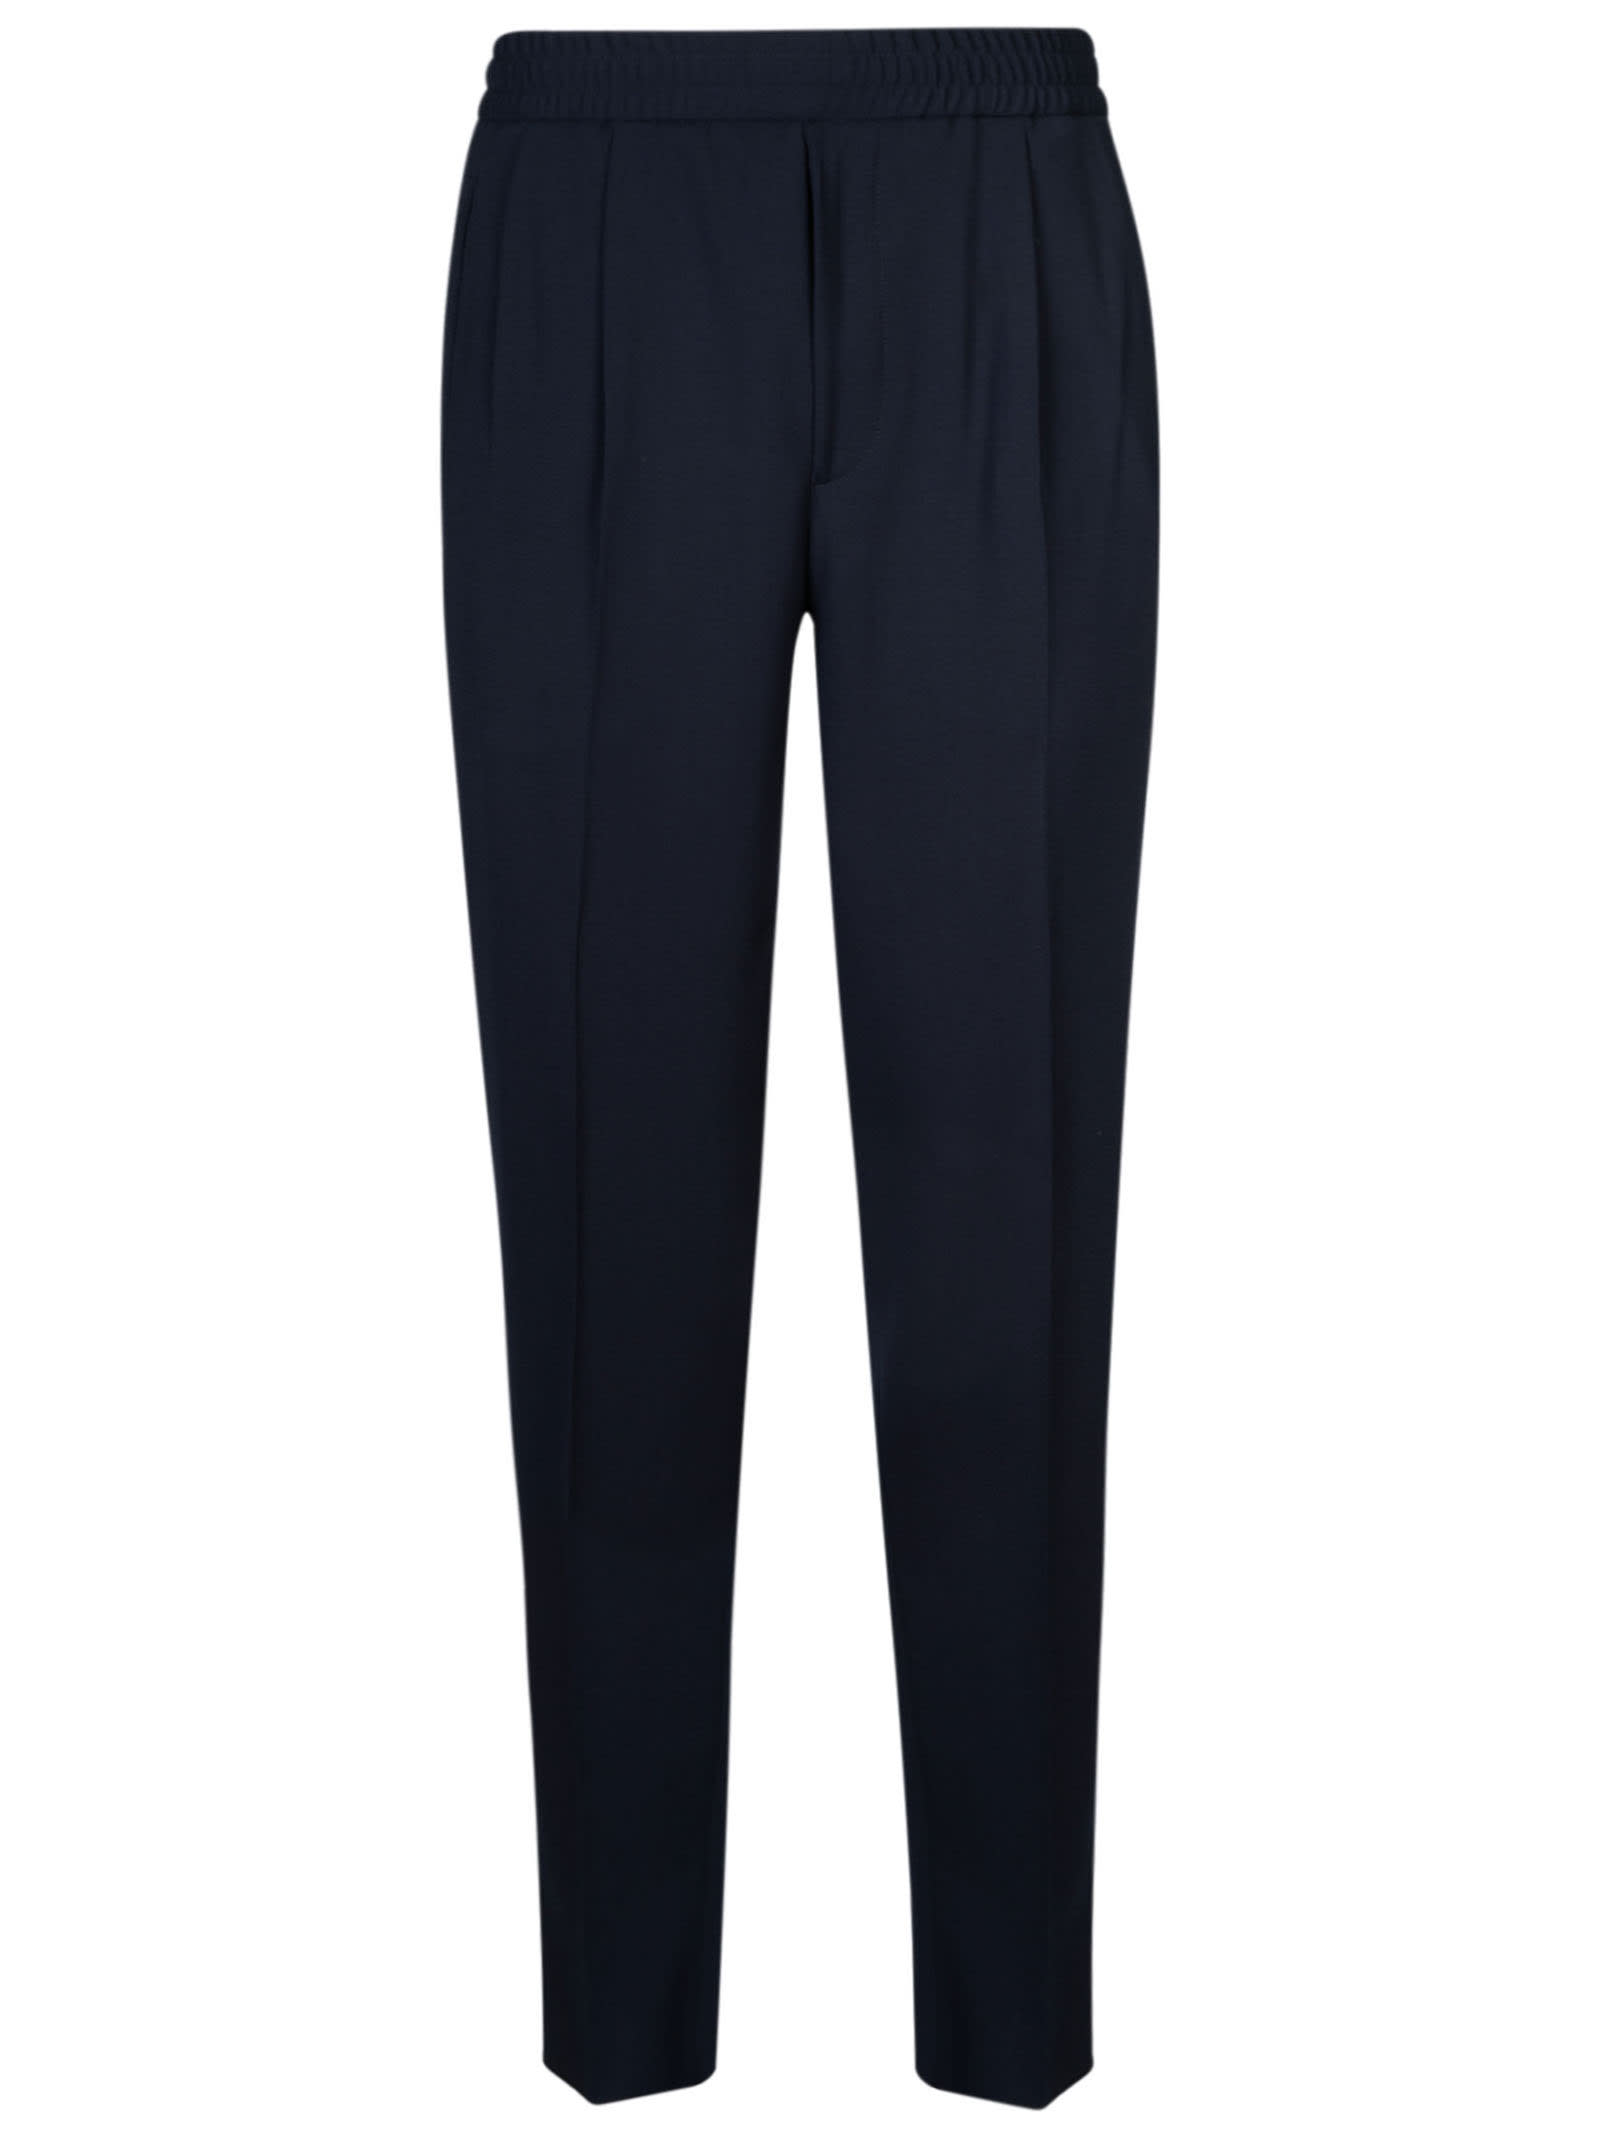 Ribbed Waist Trousers